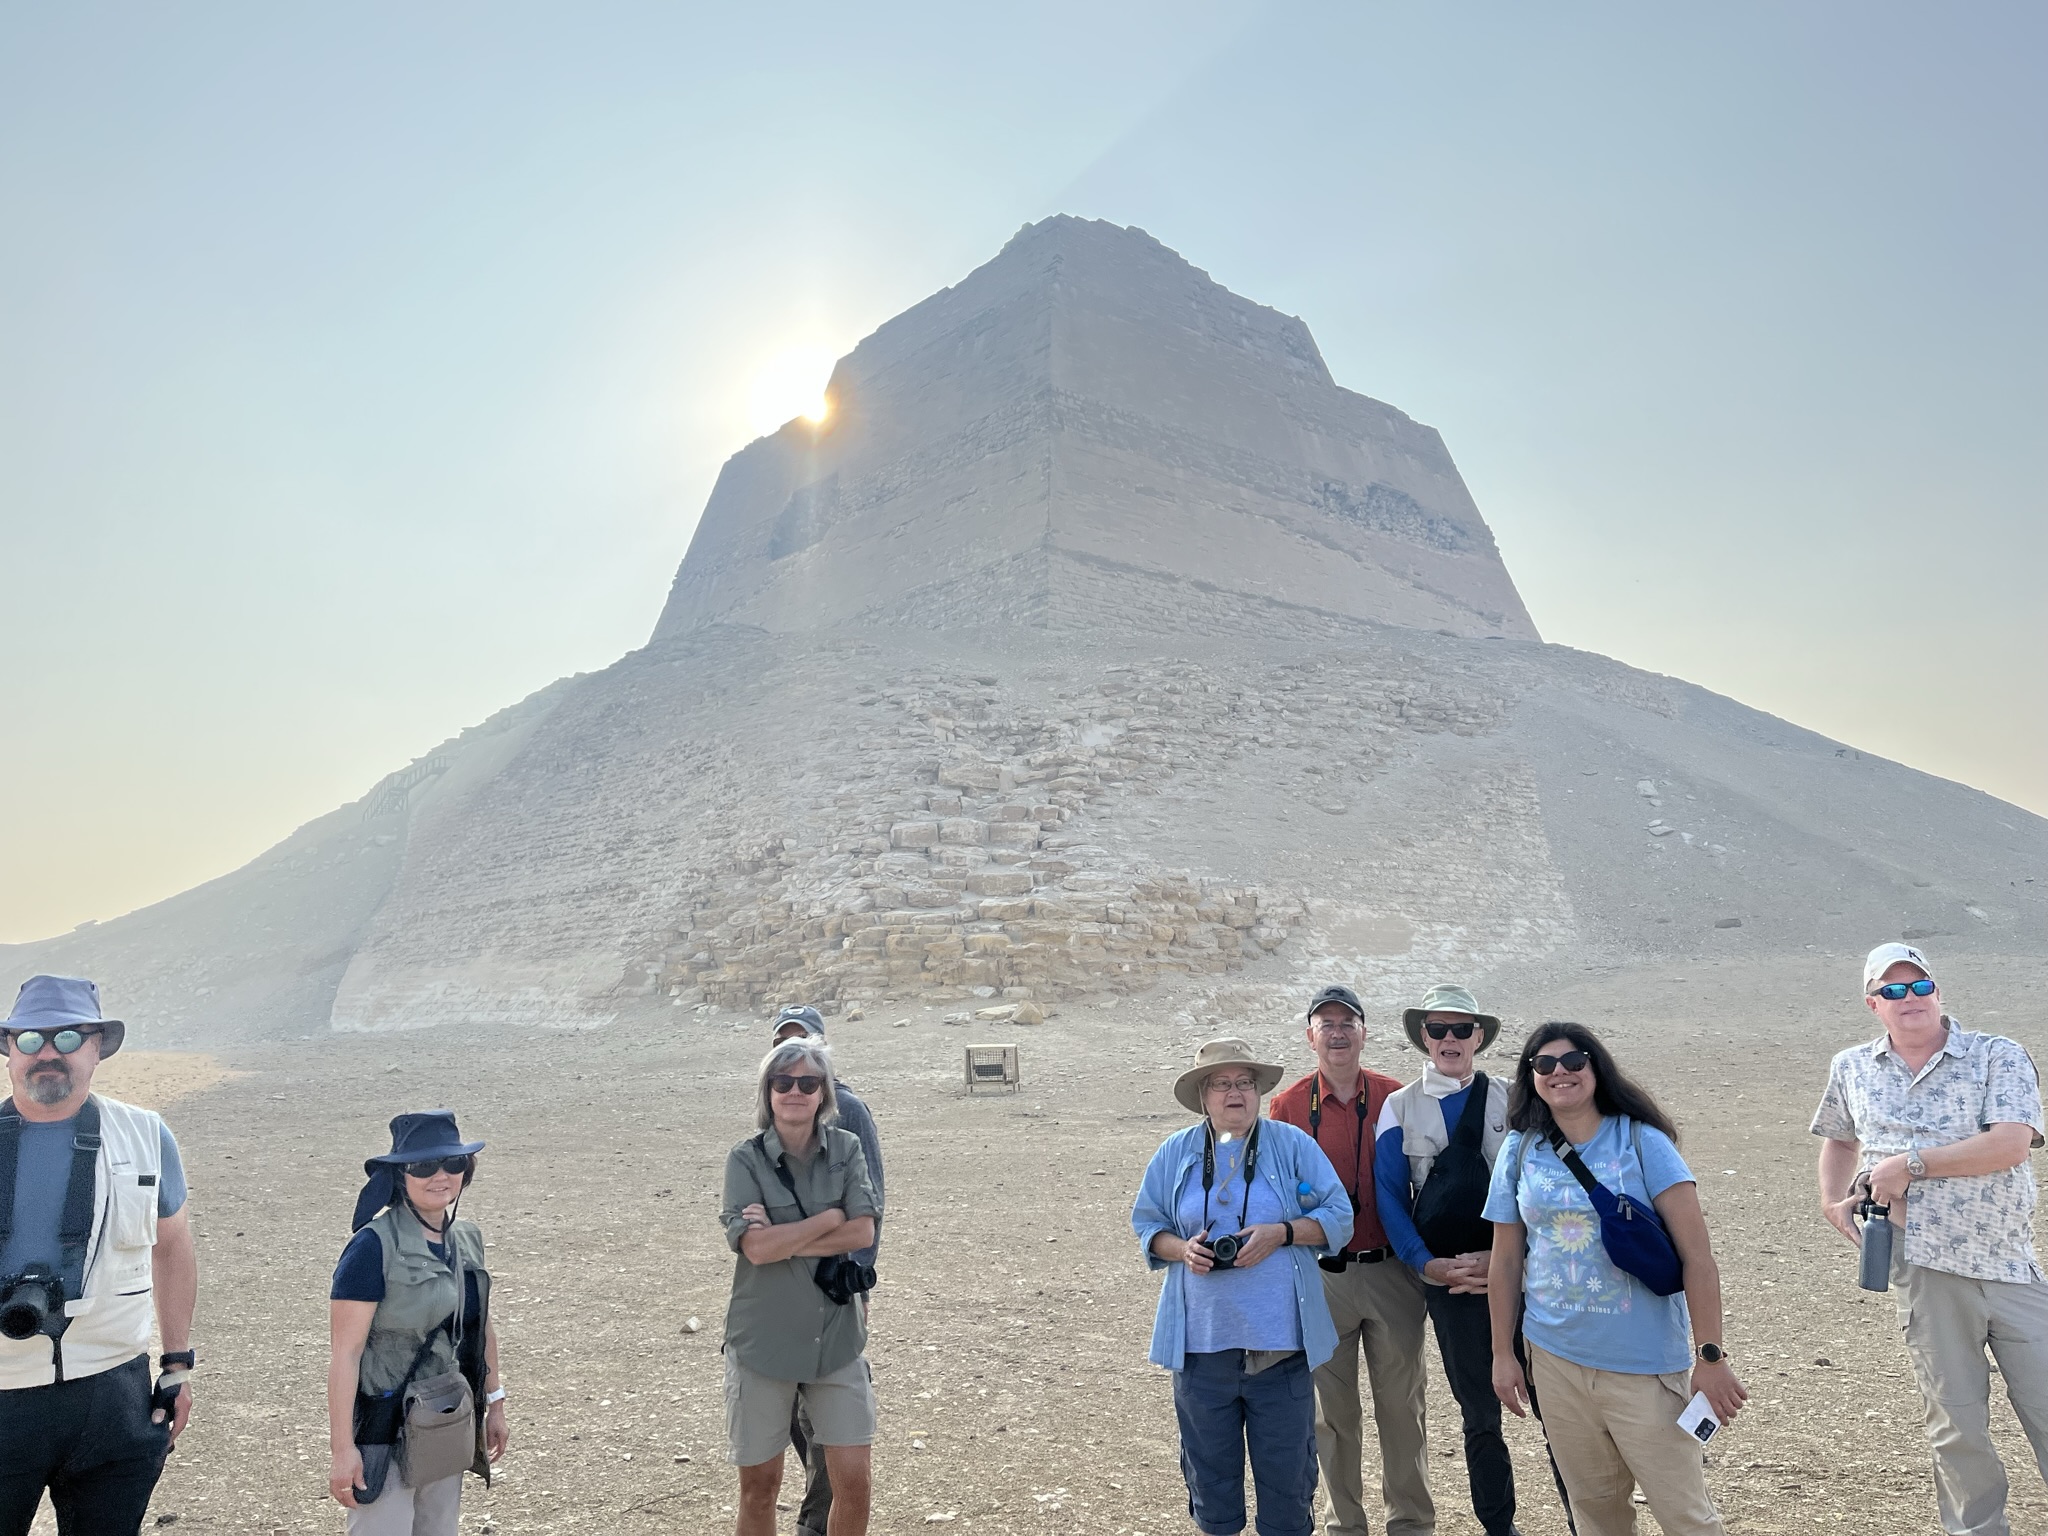 Special visit to the collapsed Meidum Pyramid i- 2nd pyramid ever built.